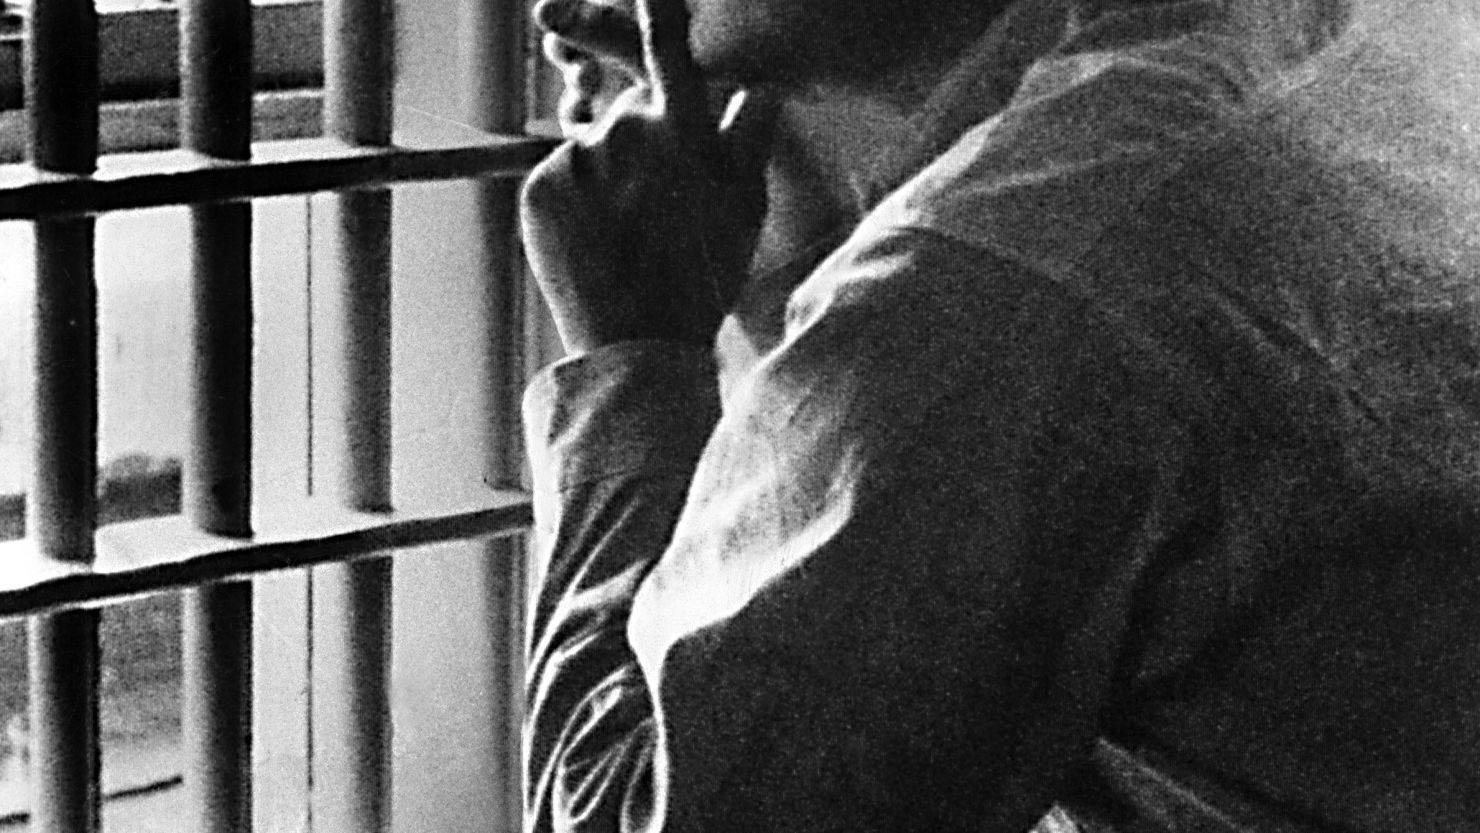 The Rev. Martin Luther King Jr. wasn't a dreamer in a Birmingham jail cell. He became something else, scholars say.
